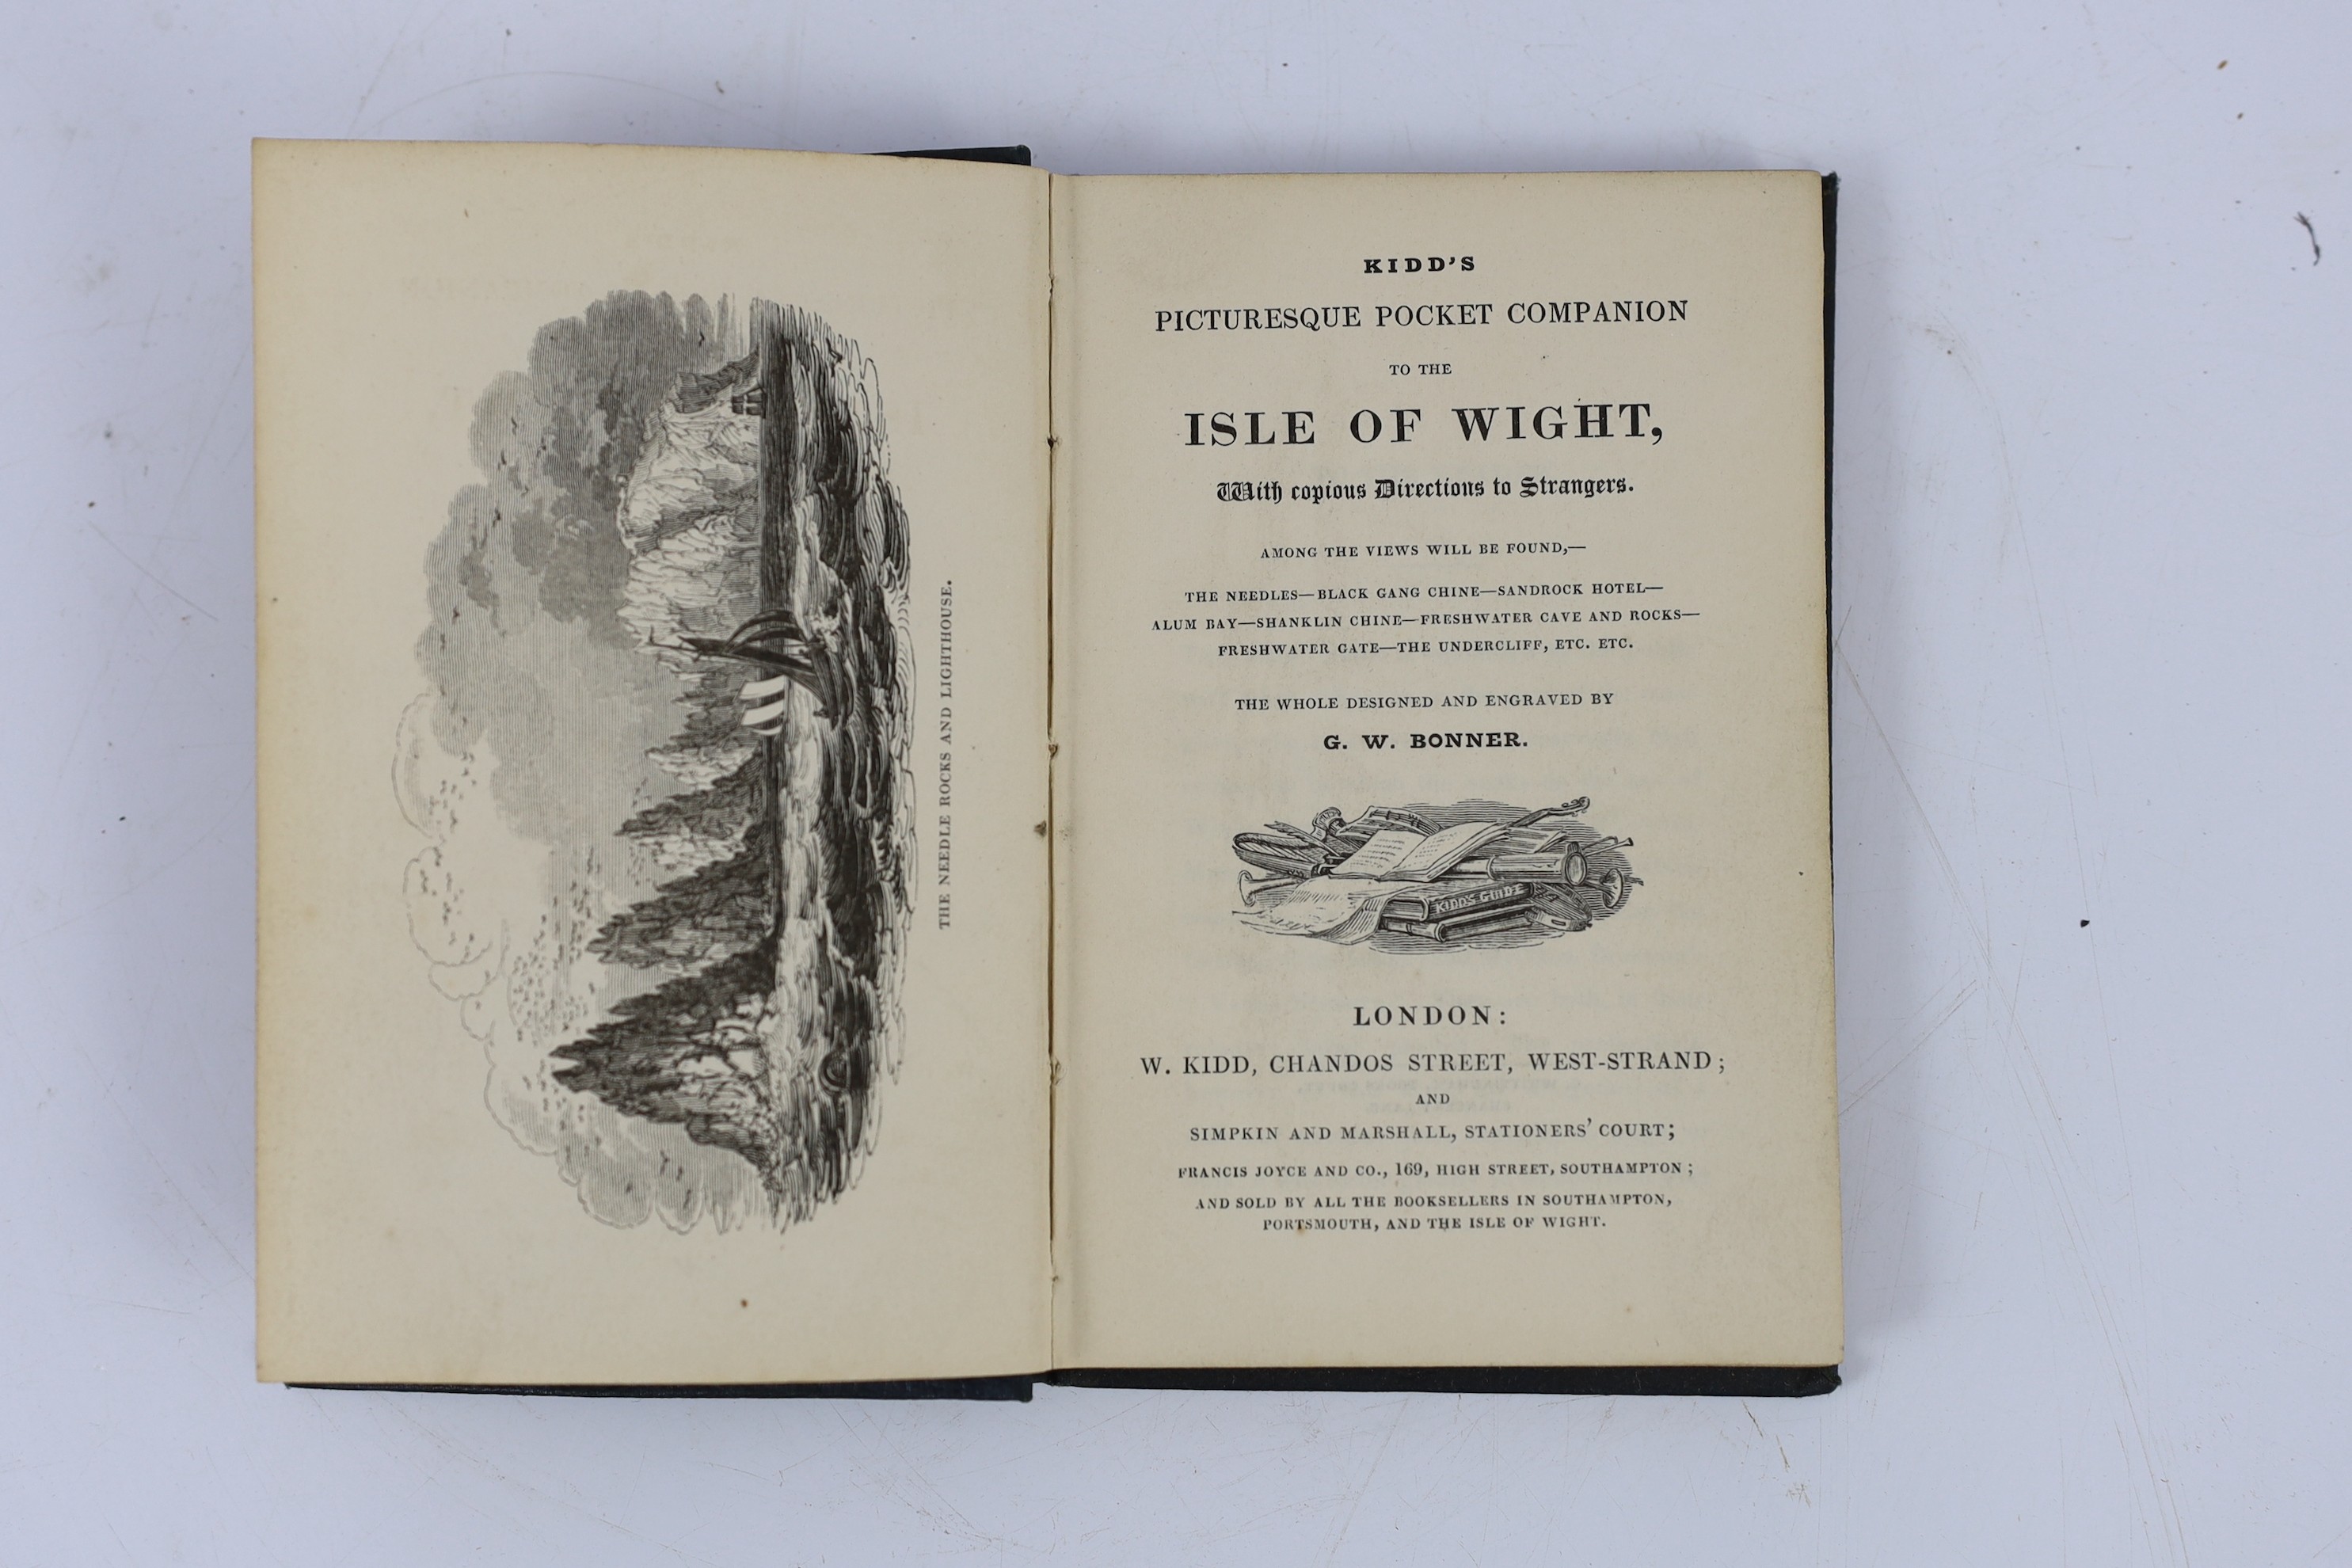 ISLE OF WIGHT: Sturch, John - A View of the Isle of Wight, in four letters to a friend...5th edition, corrected and enlarged. old half calf and marbled boards, sm.8vo. Newport: printed for and sold by the Author, 1794; B